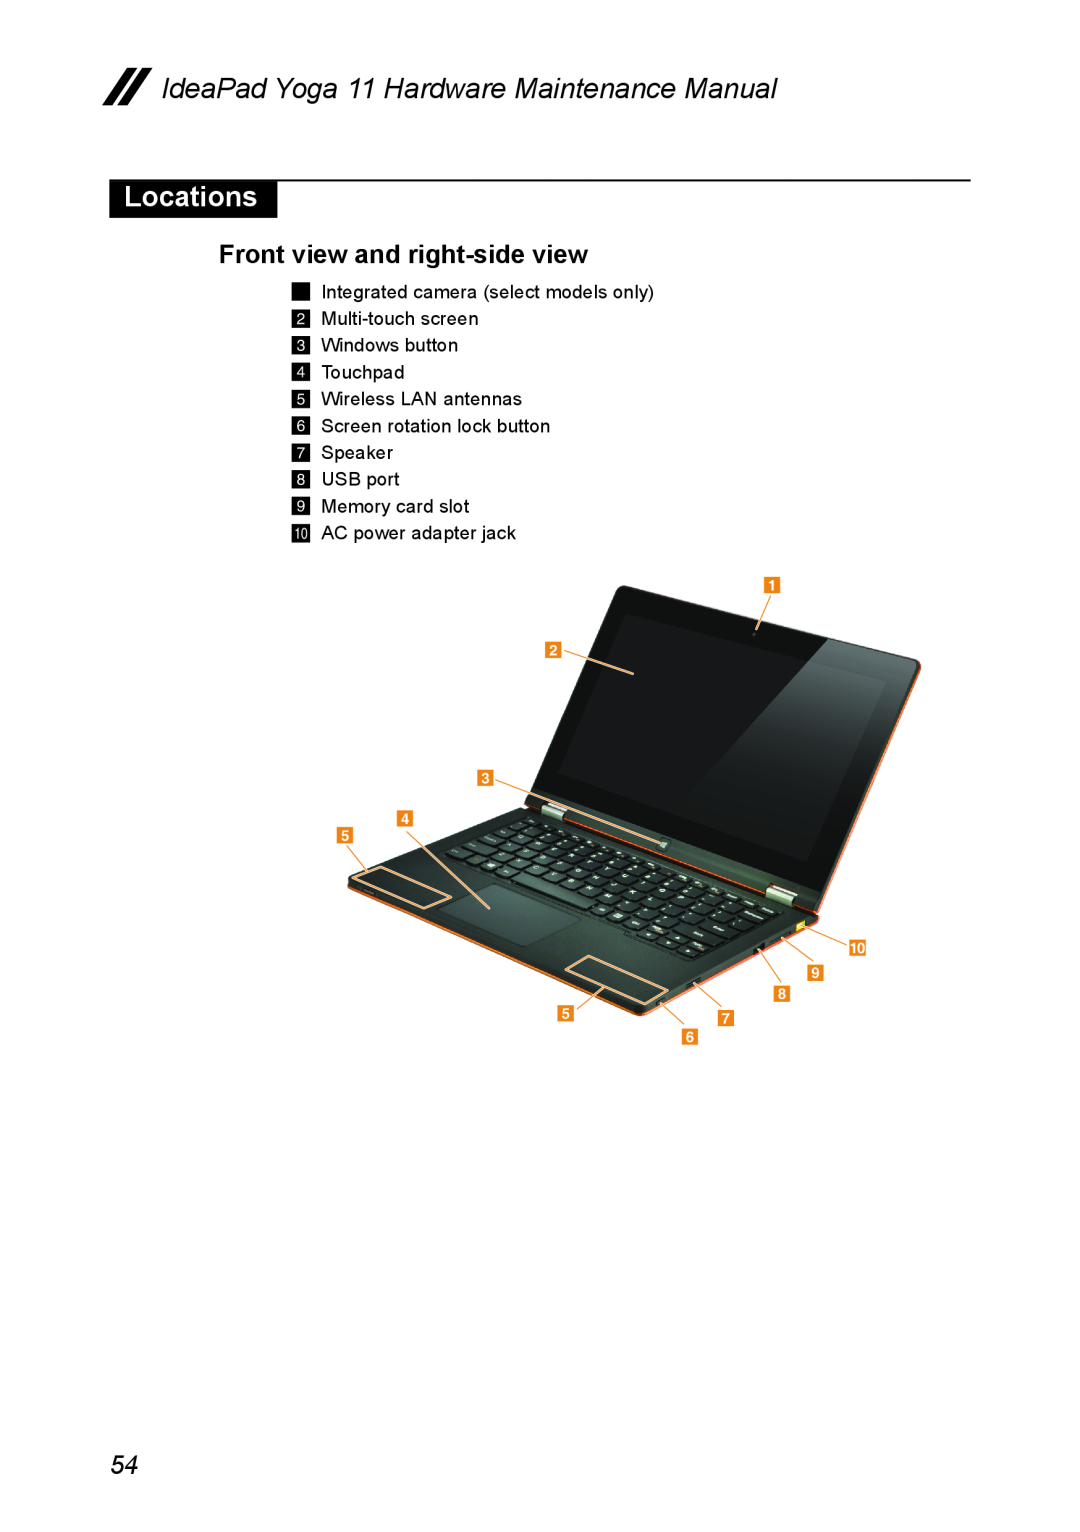 Lenovo manual Locations, Front view and right-side view, IdeaPad Yoga 11 Hardware Maintenance Manual 